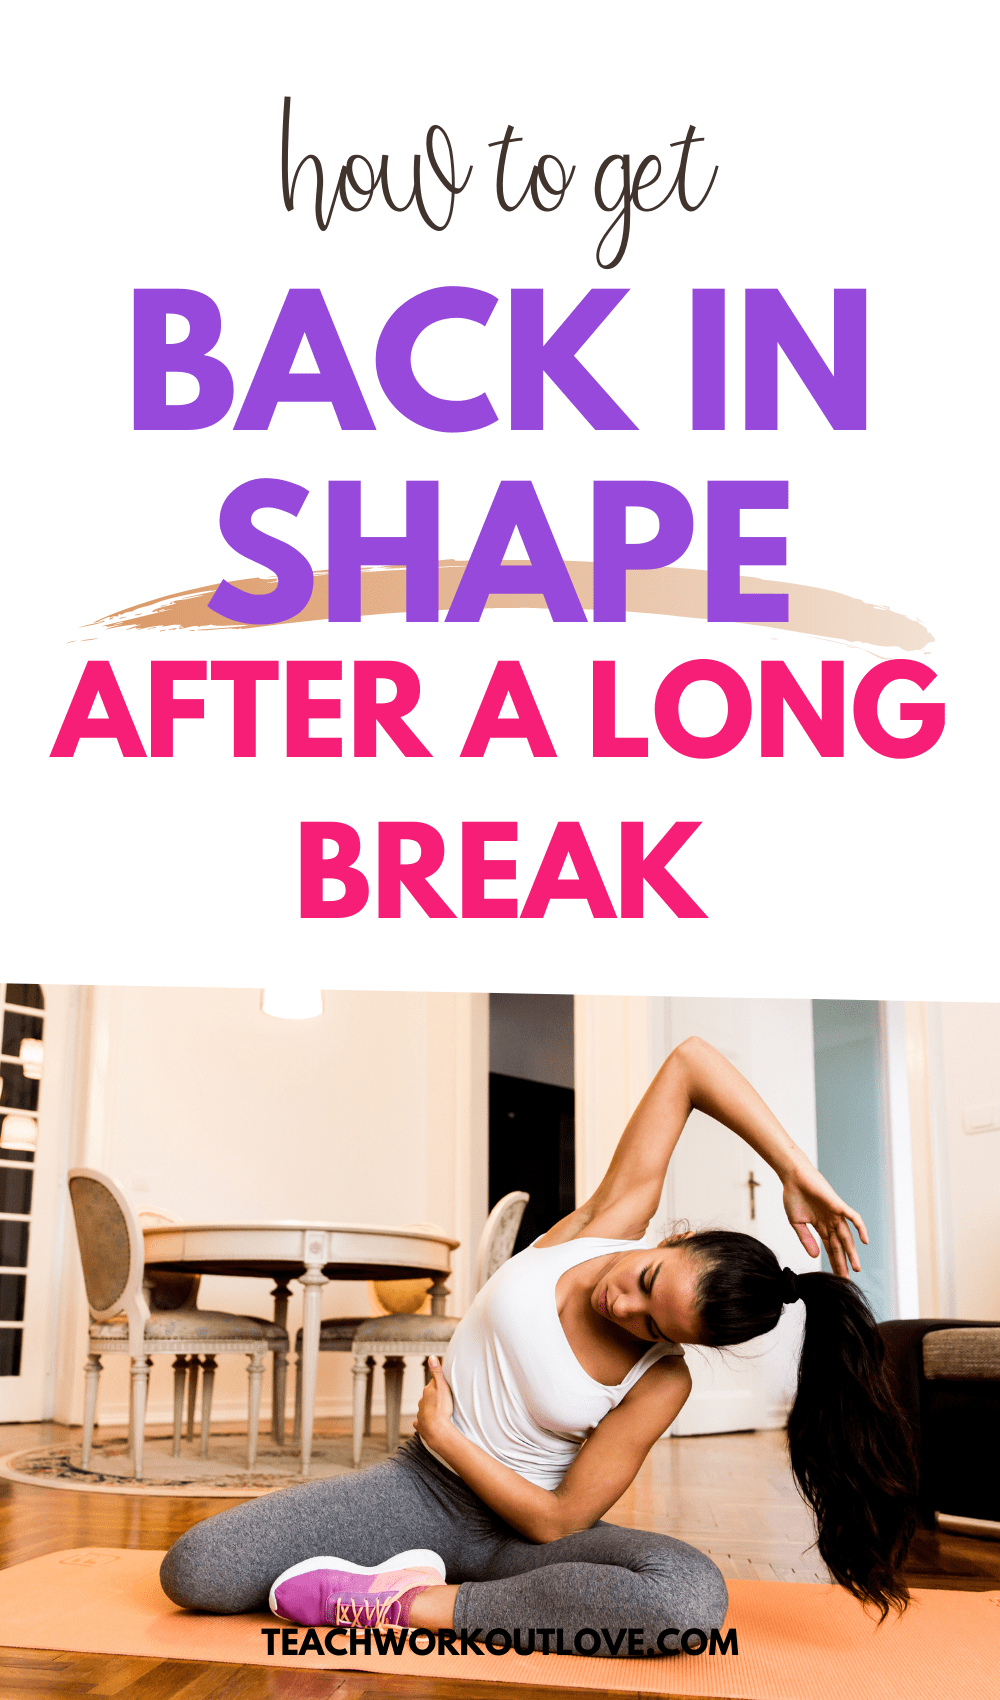 It happens to almost everyone. We get into shape and then take a break. Here's steps you should take if you want to get back in shape after a long break.